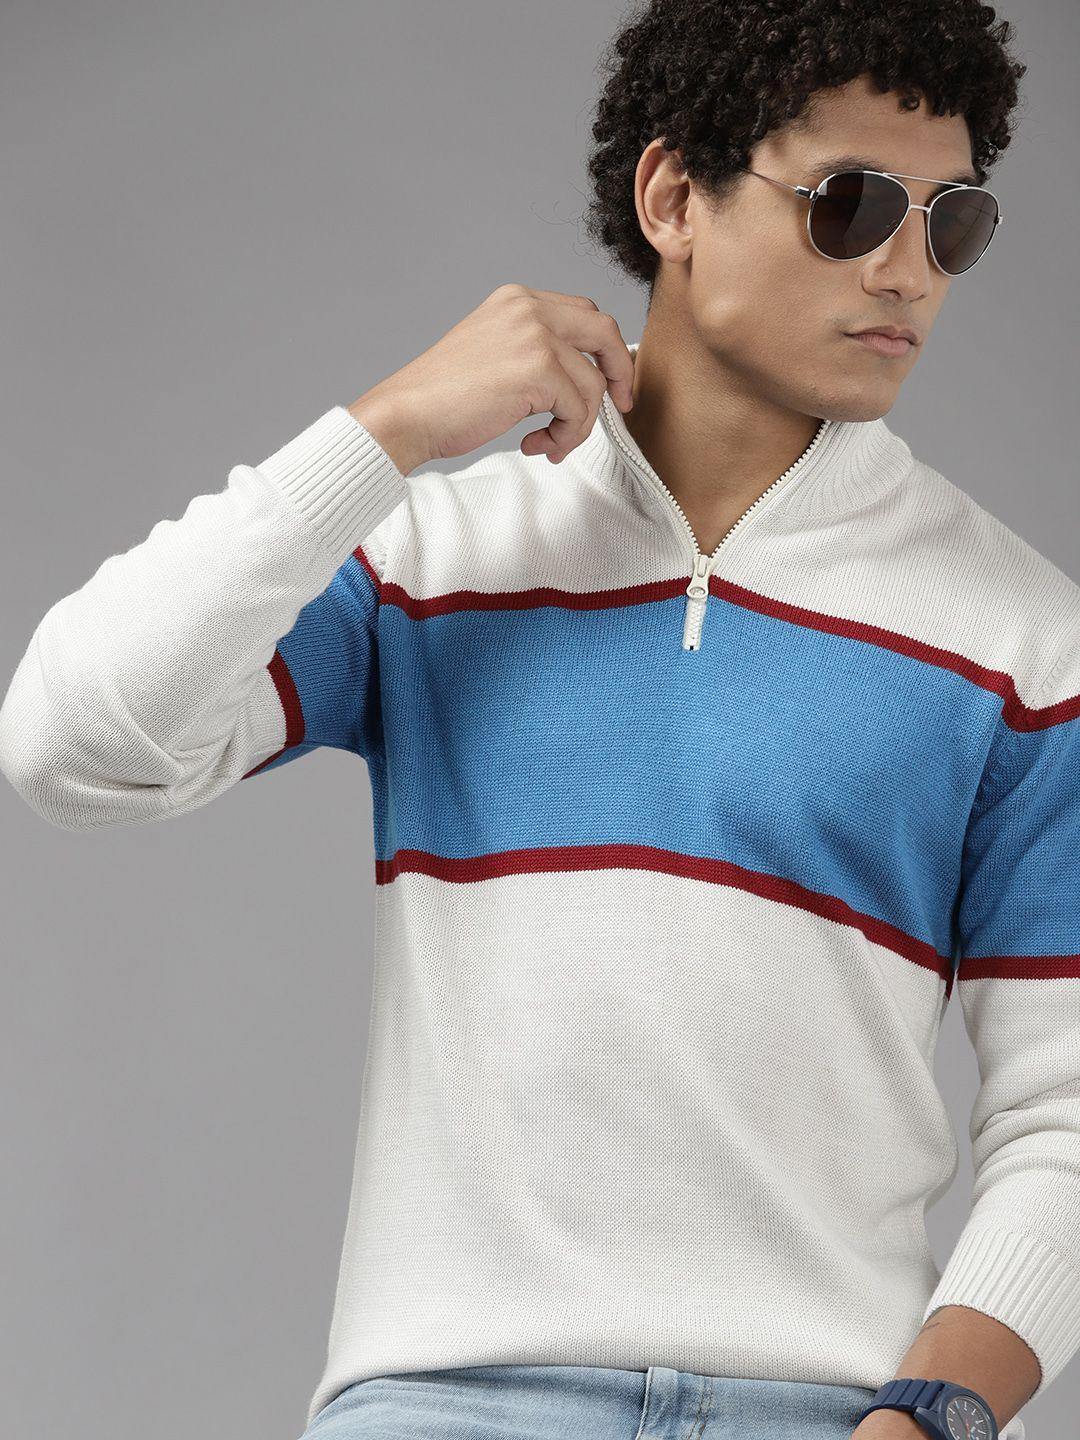 the-roadster-lifestyle-co.-men-off-white-&-blue-acrylic-striped-half-zipper-pullover